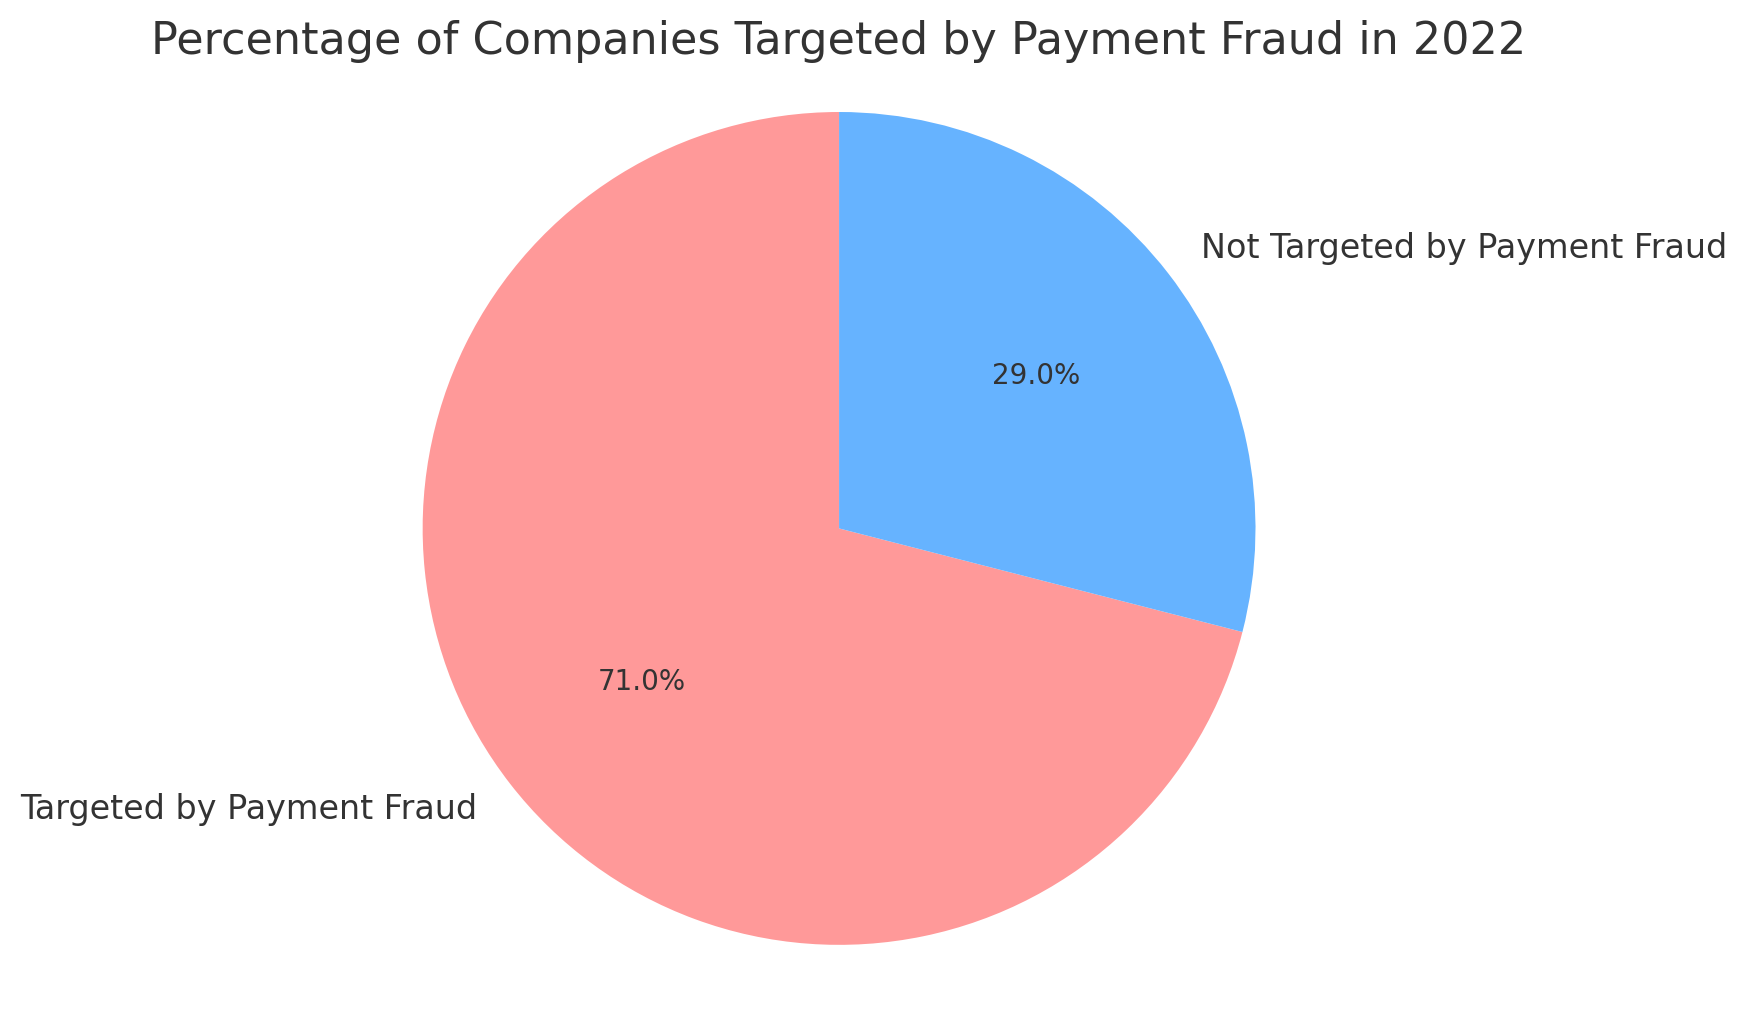 Companies Subject to Fraud in 2022